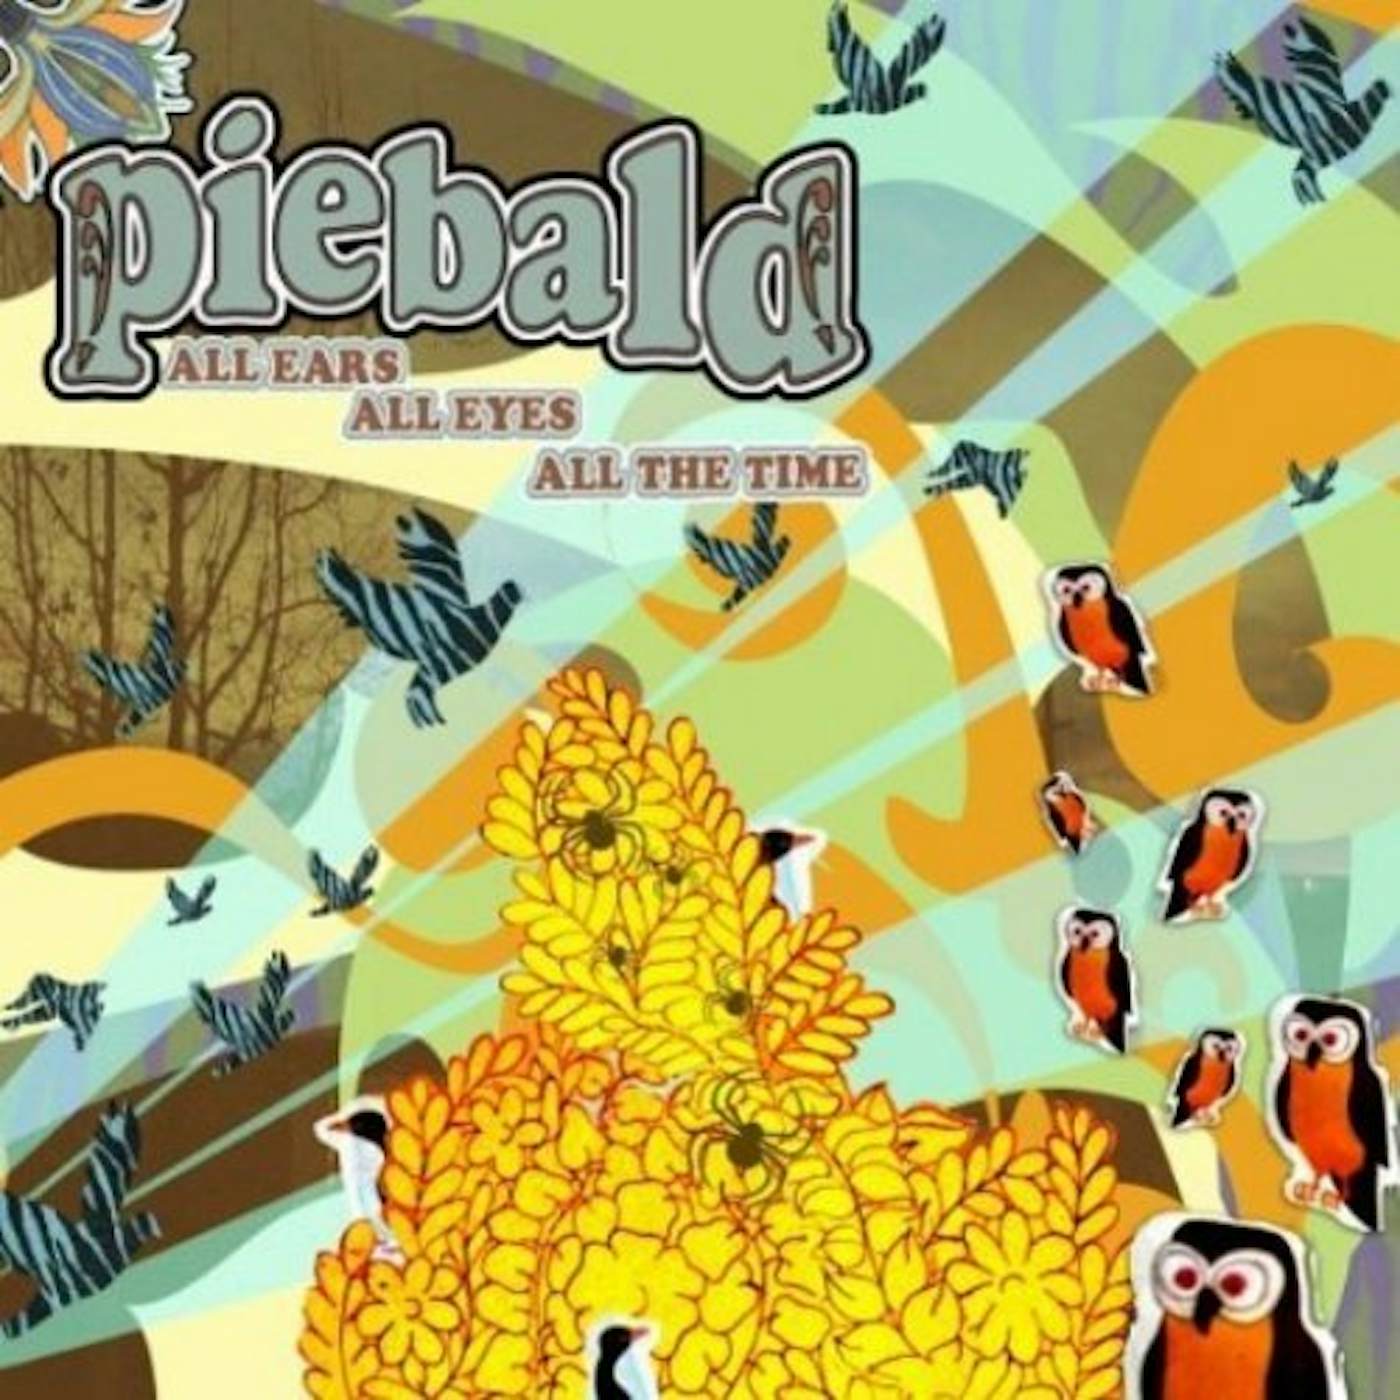 Piebald ALL EARS ALL EYES ALL THE TIME CD